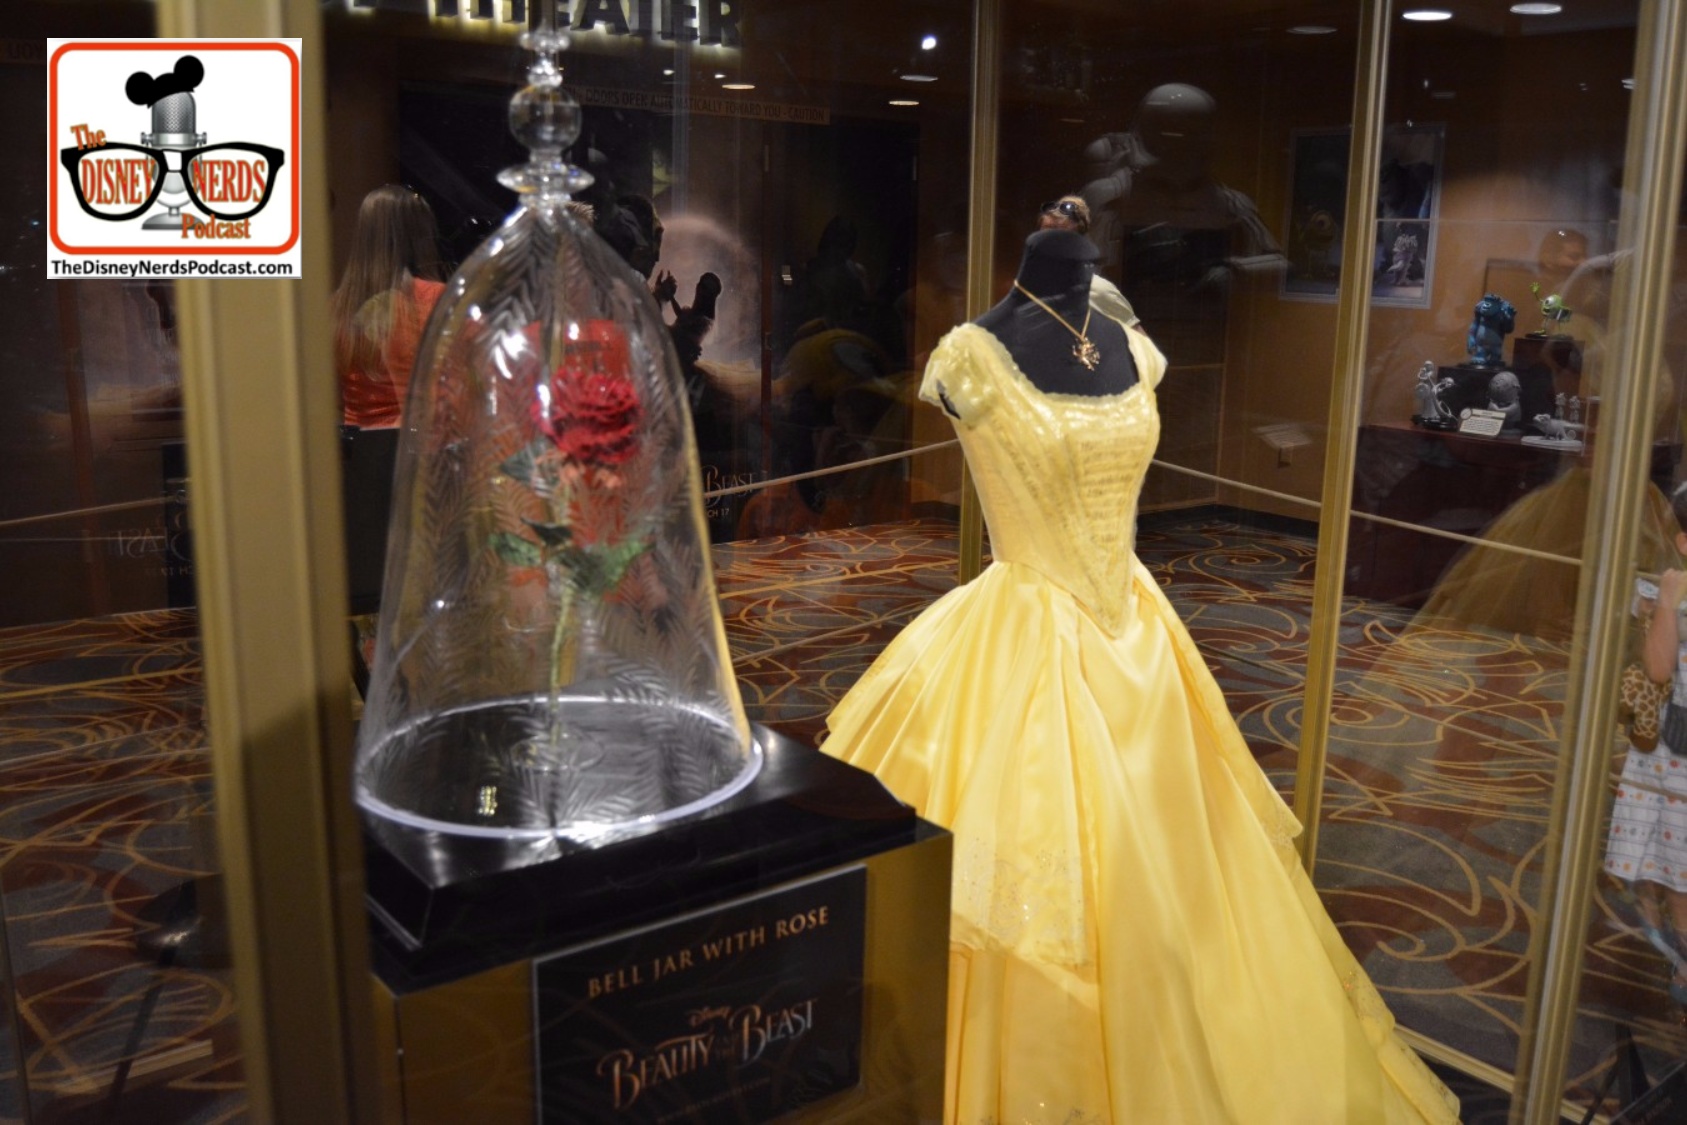 Hollywood Studios March 2017 - Dress and Rose from Live Action Beauty and the Beast